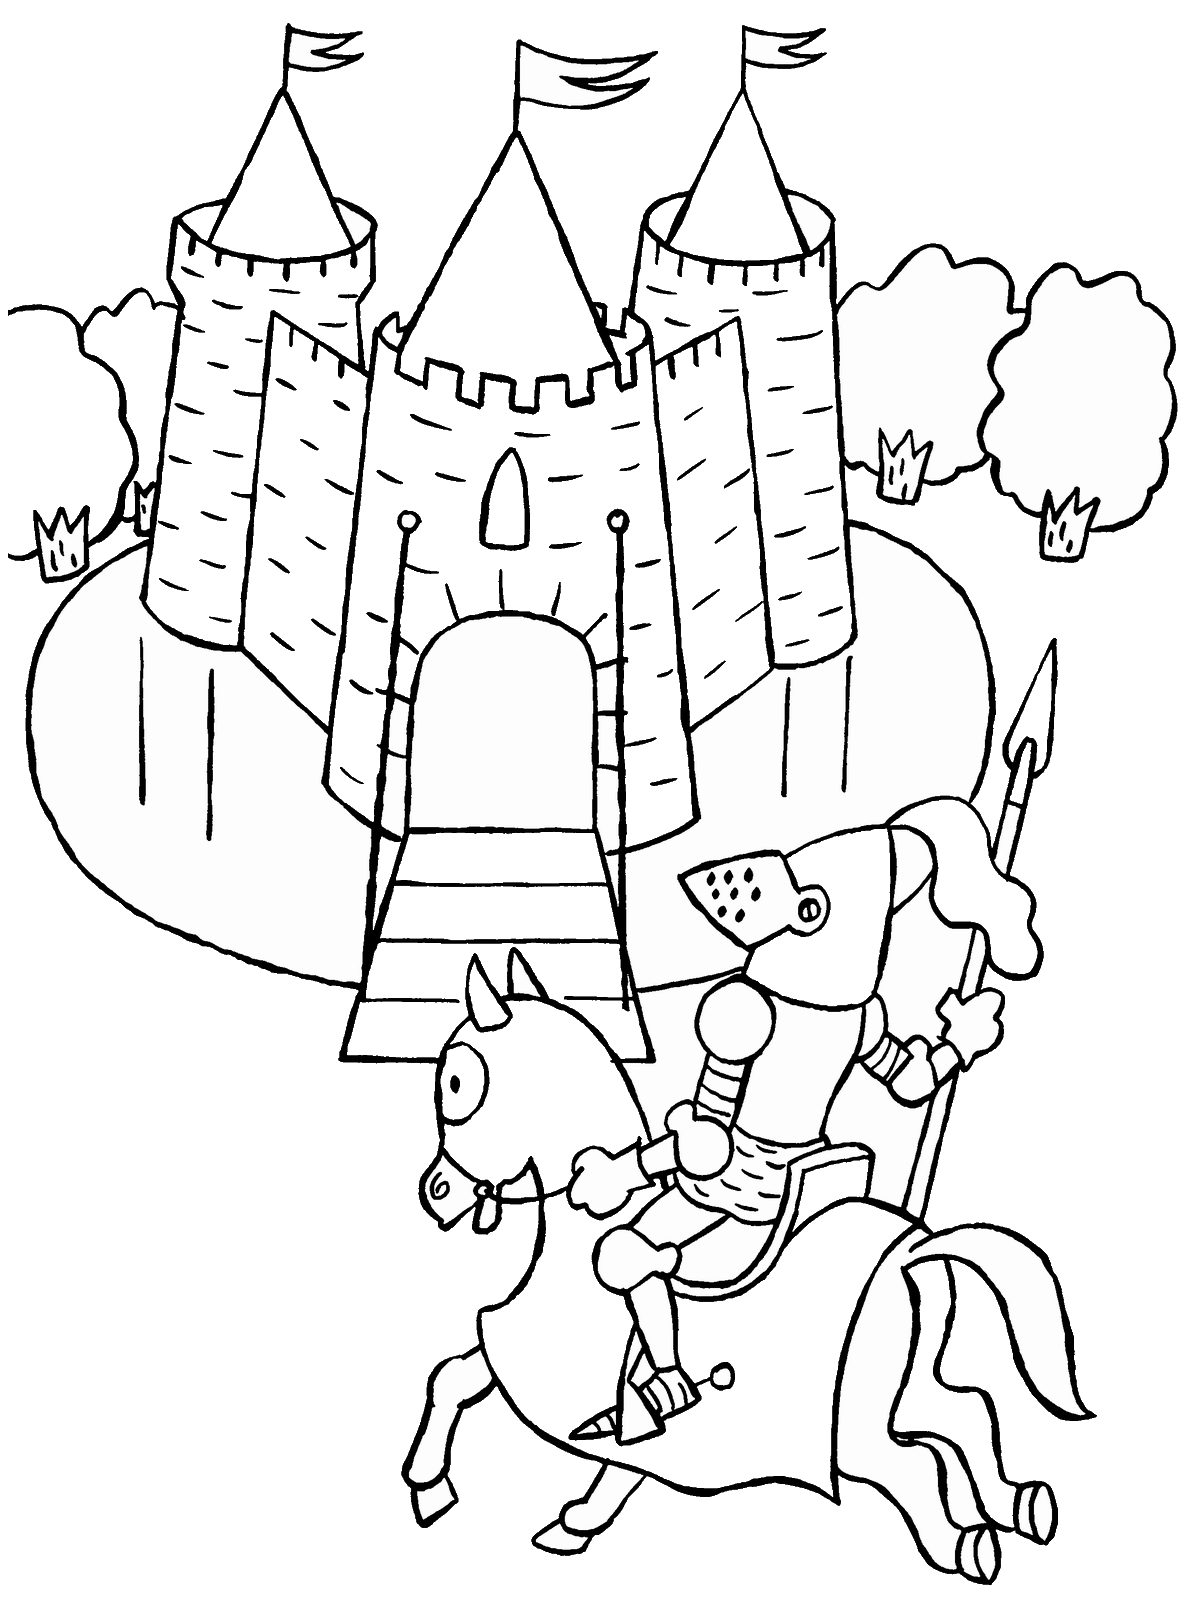 Knights Coloring Pages for boys knightsc24 Printable 2020 0547 Coloring4free